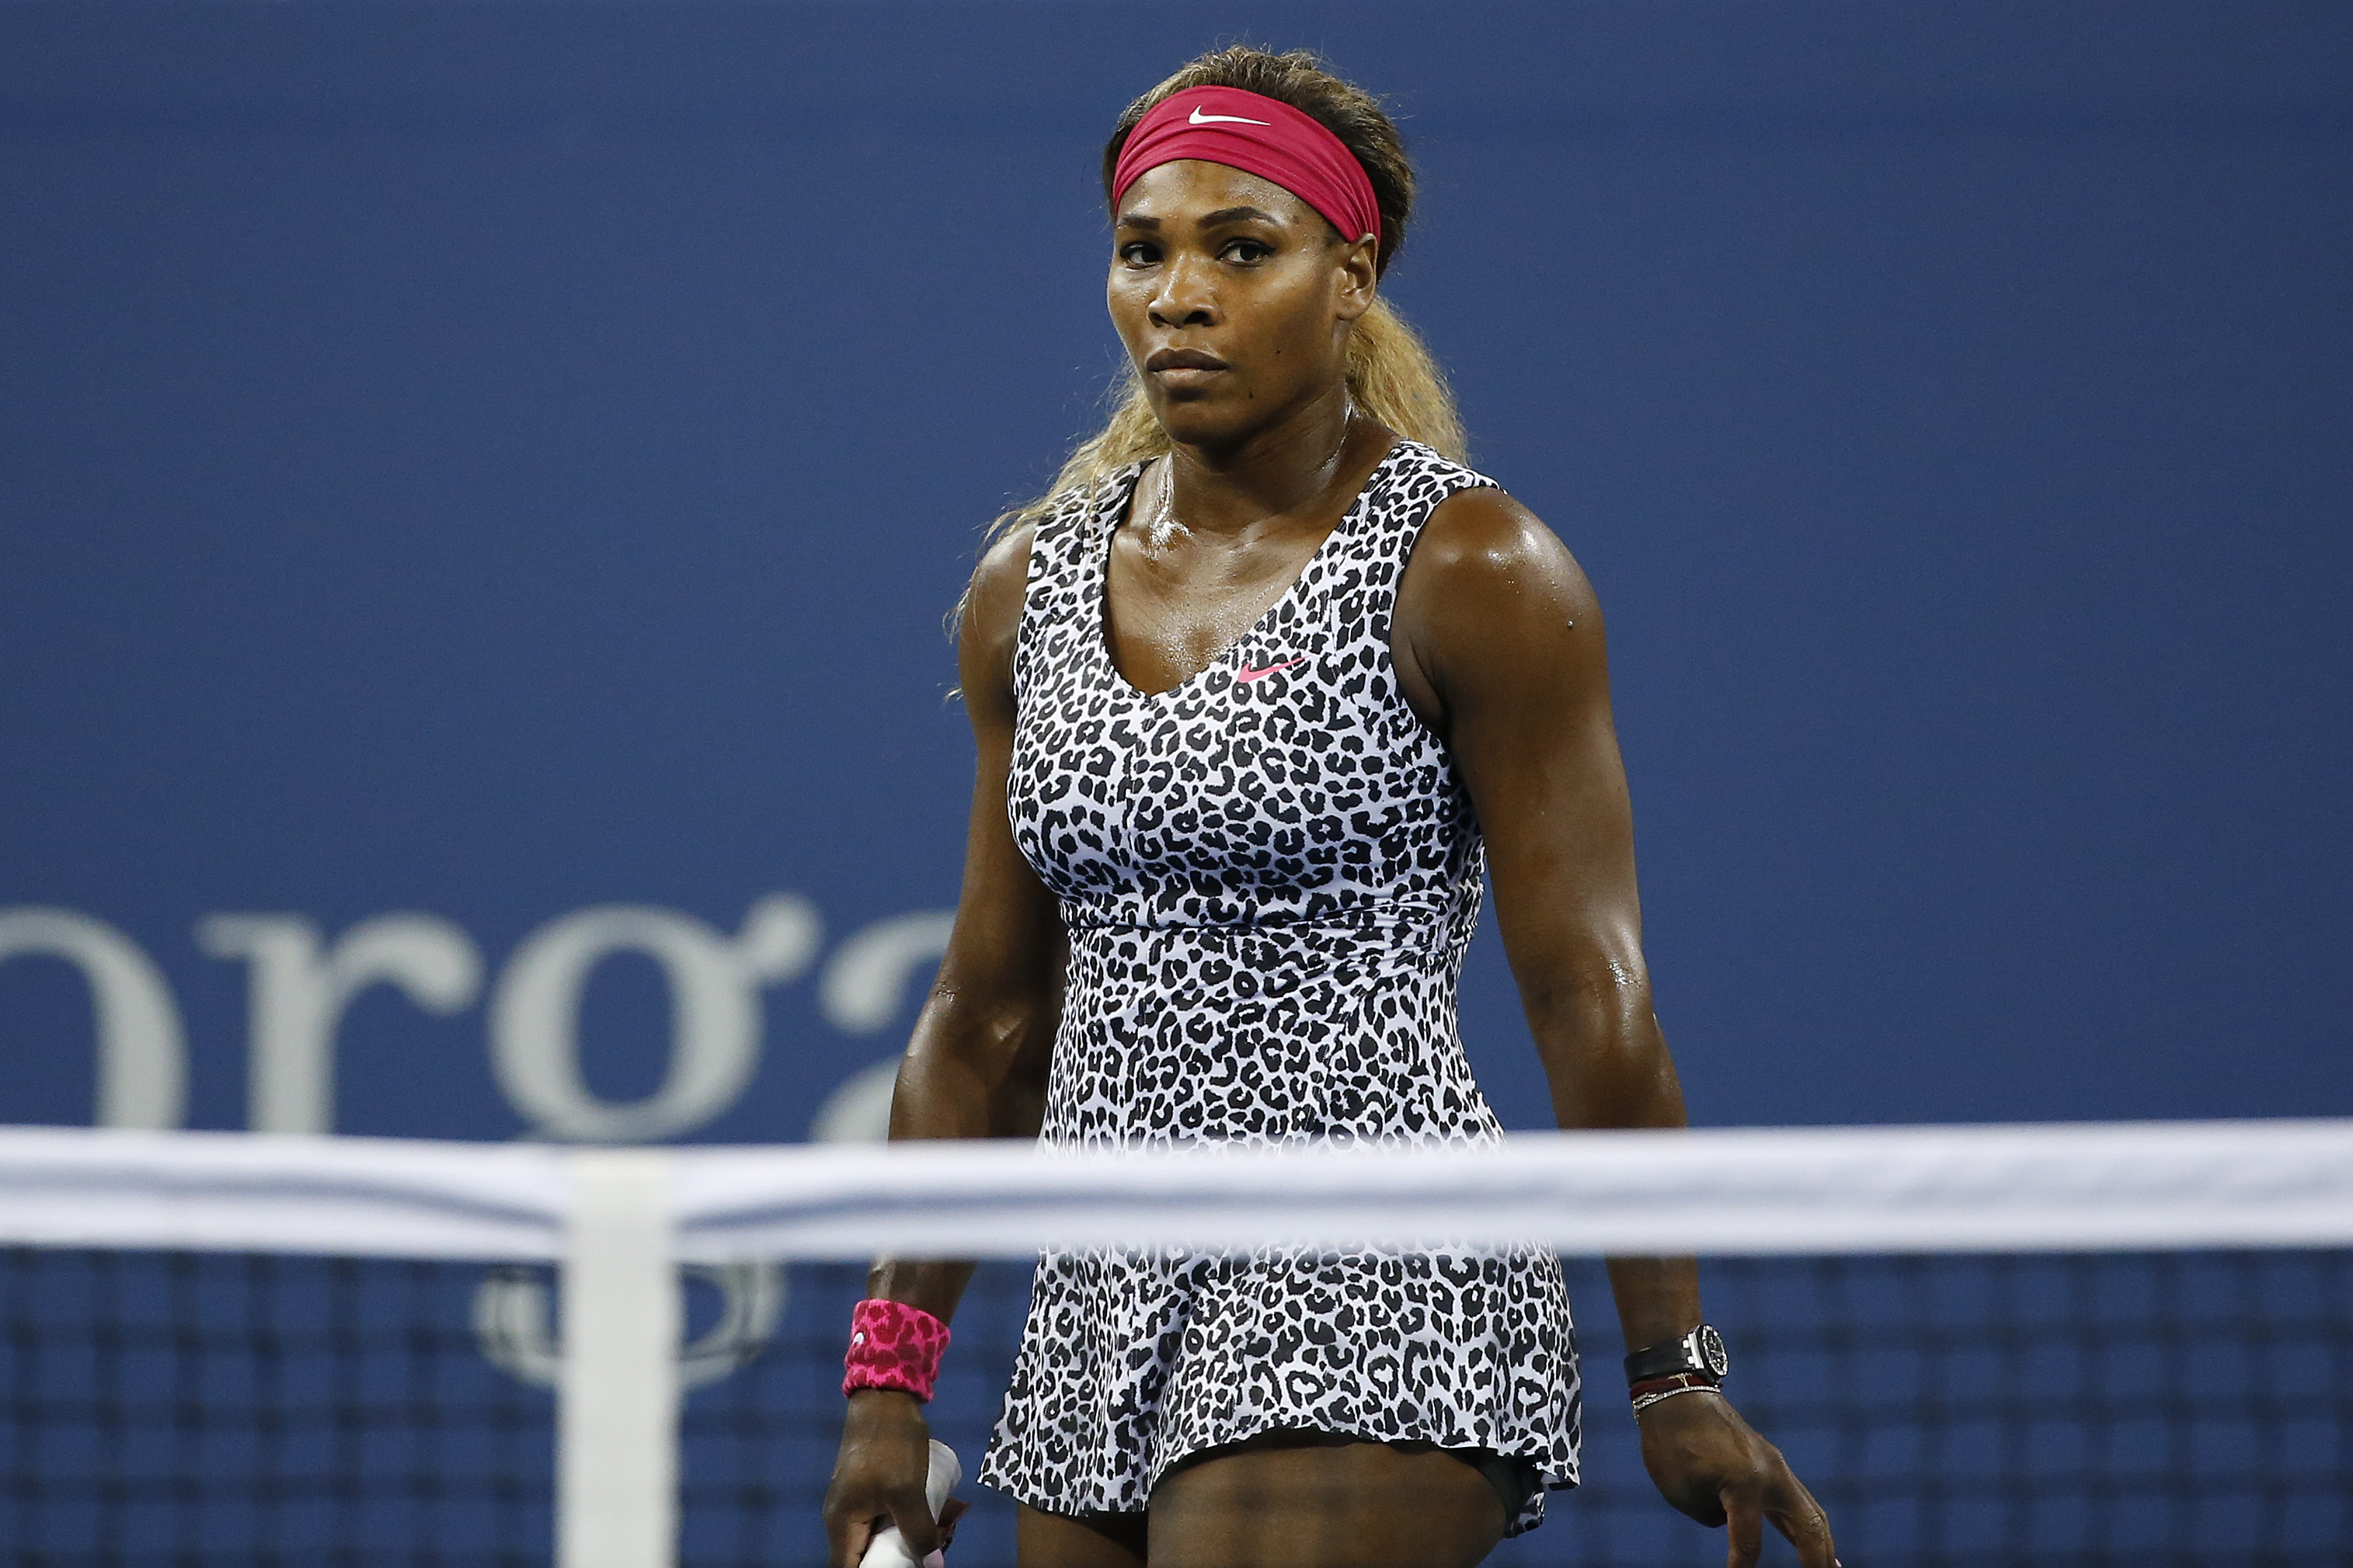 Great Outfits in Fashion History: Serena Williams in a Studded Leather  Jacket at the 2004 US Open - Fashionista